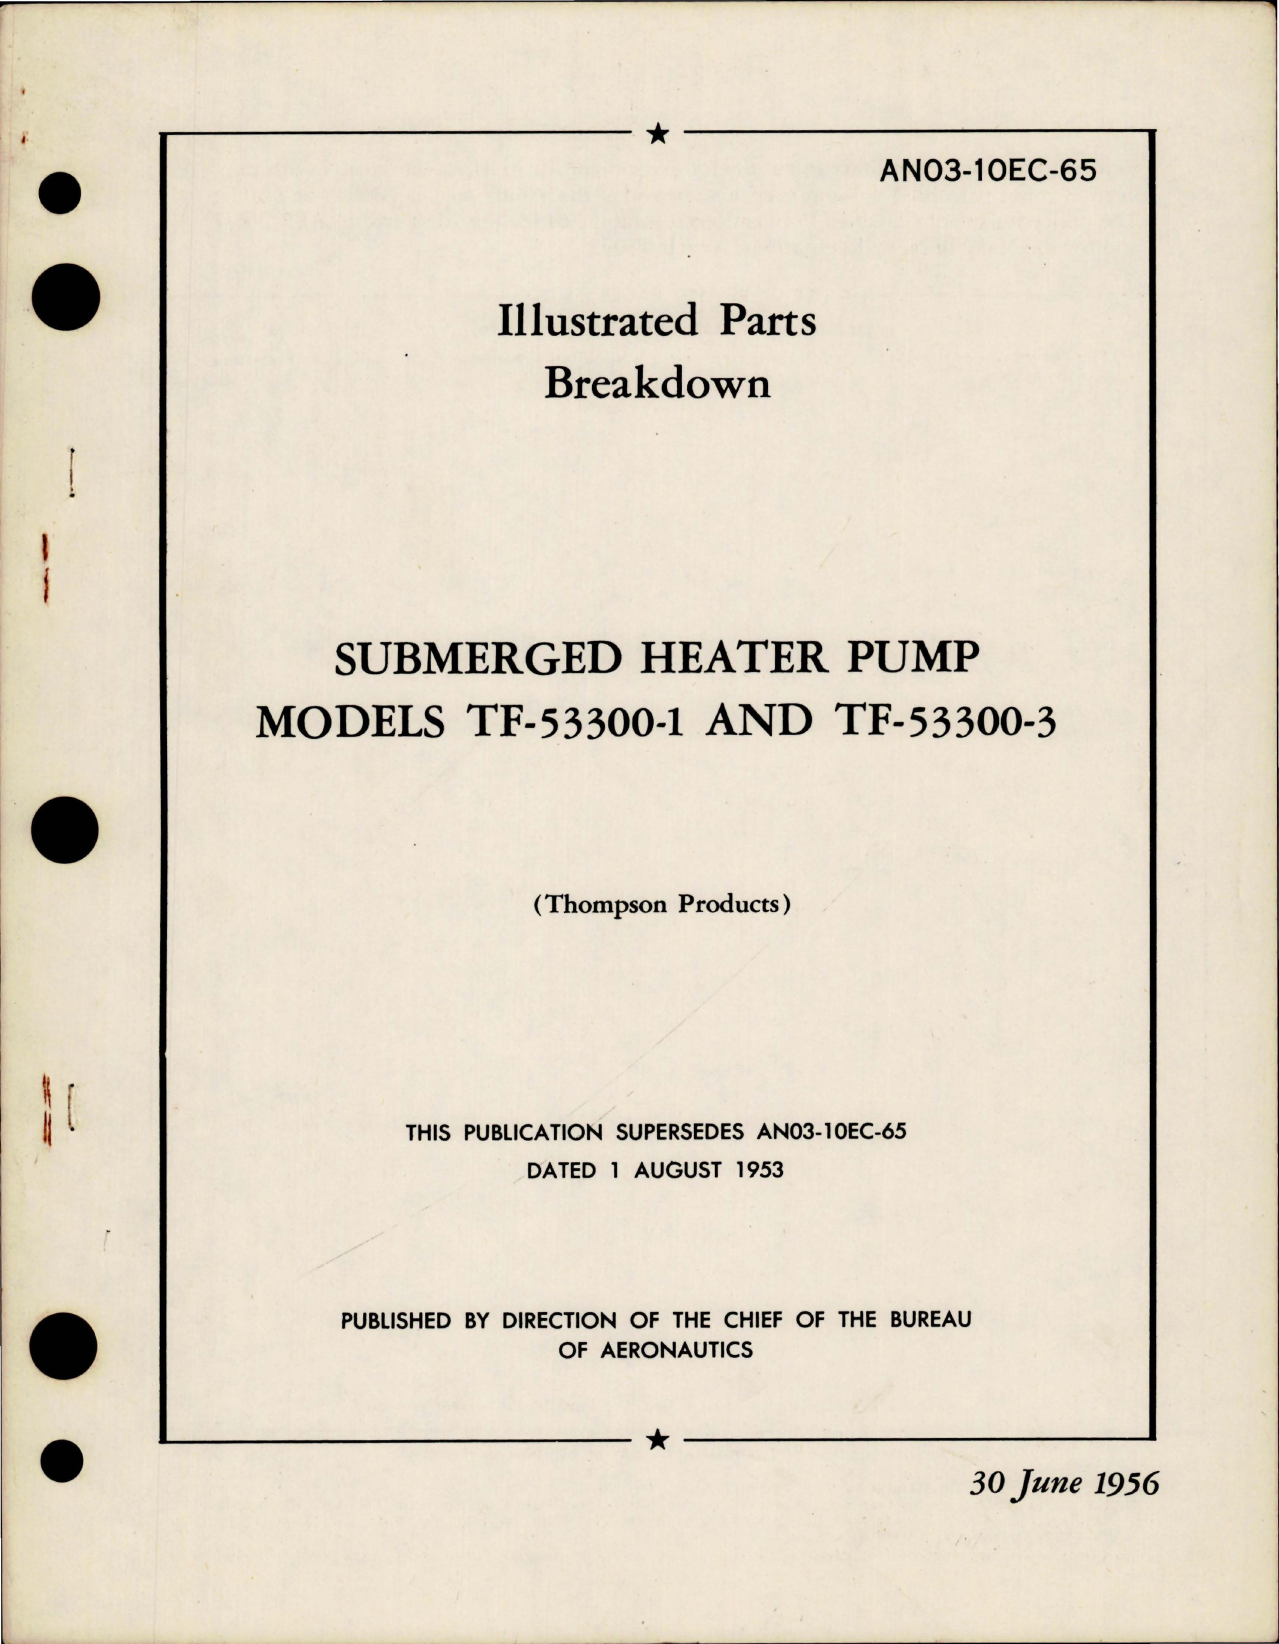 Sample page 1 from AirCorps Library document: Illustrated Parts Breakdown for Submerged Heather Pump - Models TF-53300-1 and TF-53300-3 